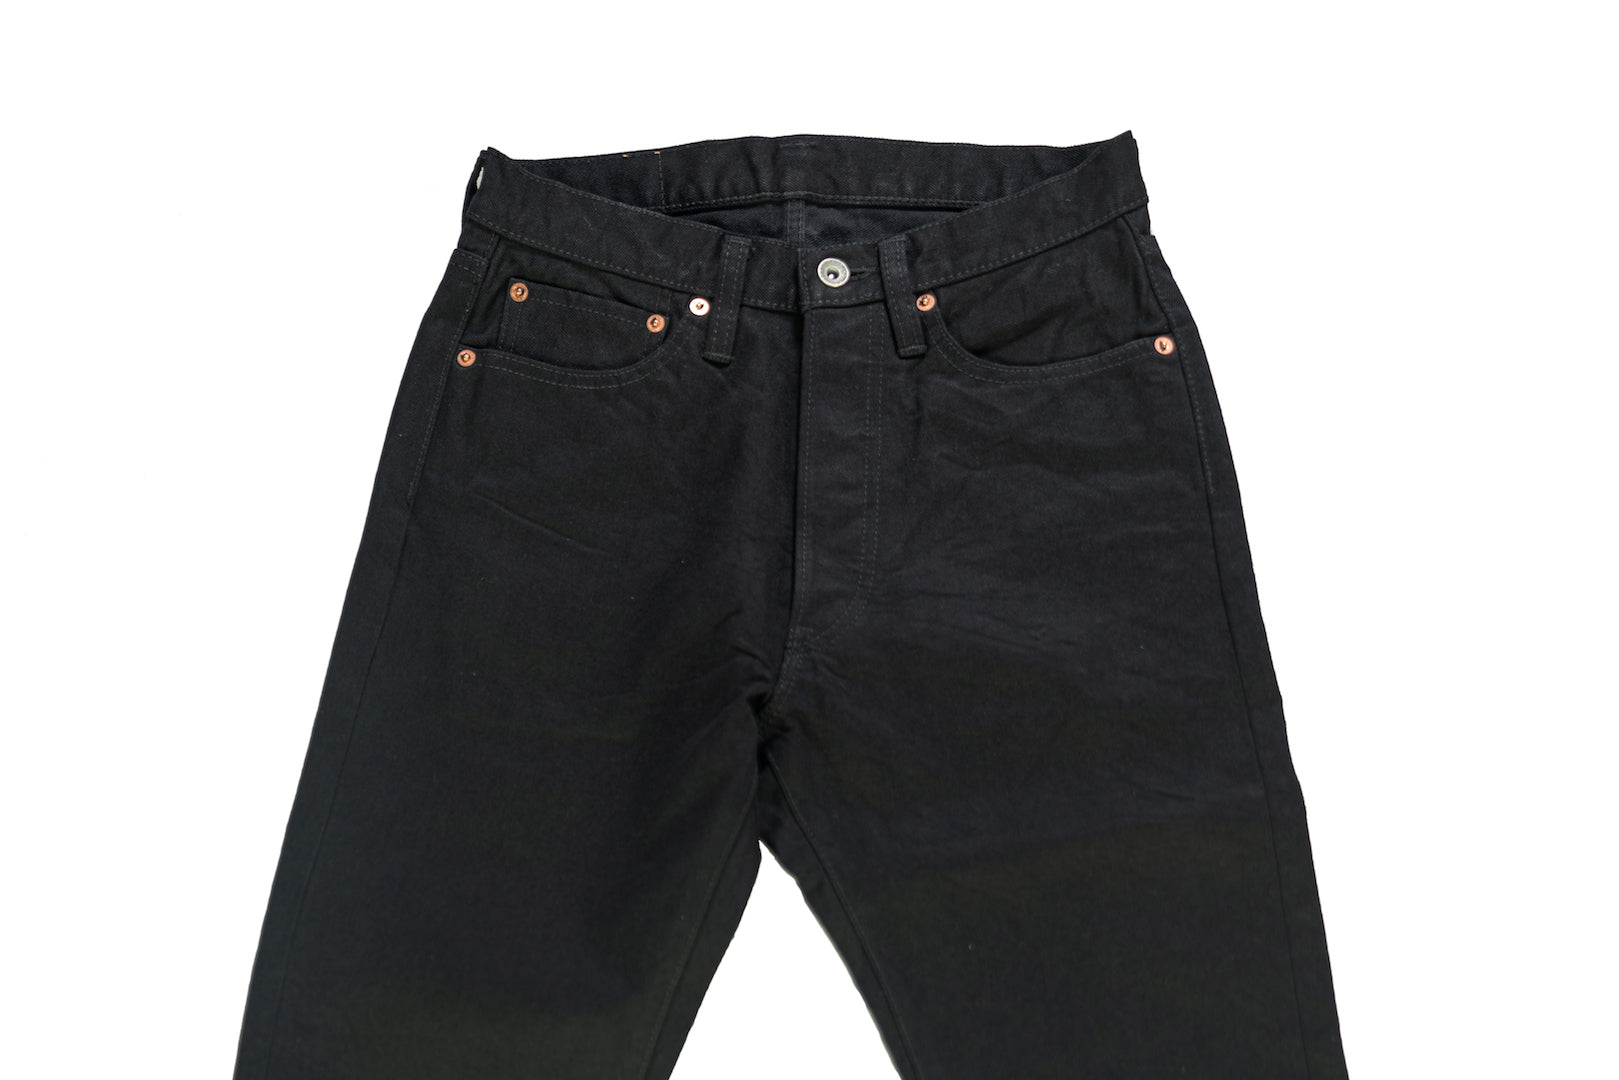 Iron Heart 888-14BB 14oz Black Denim (Straight Tapered Fit) - CORLECTION